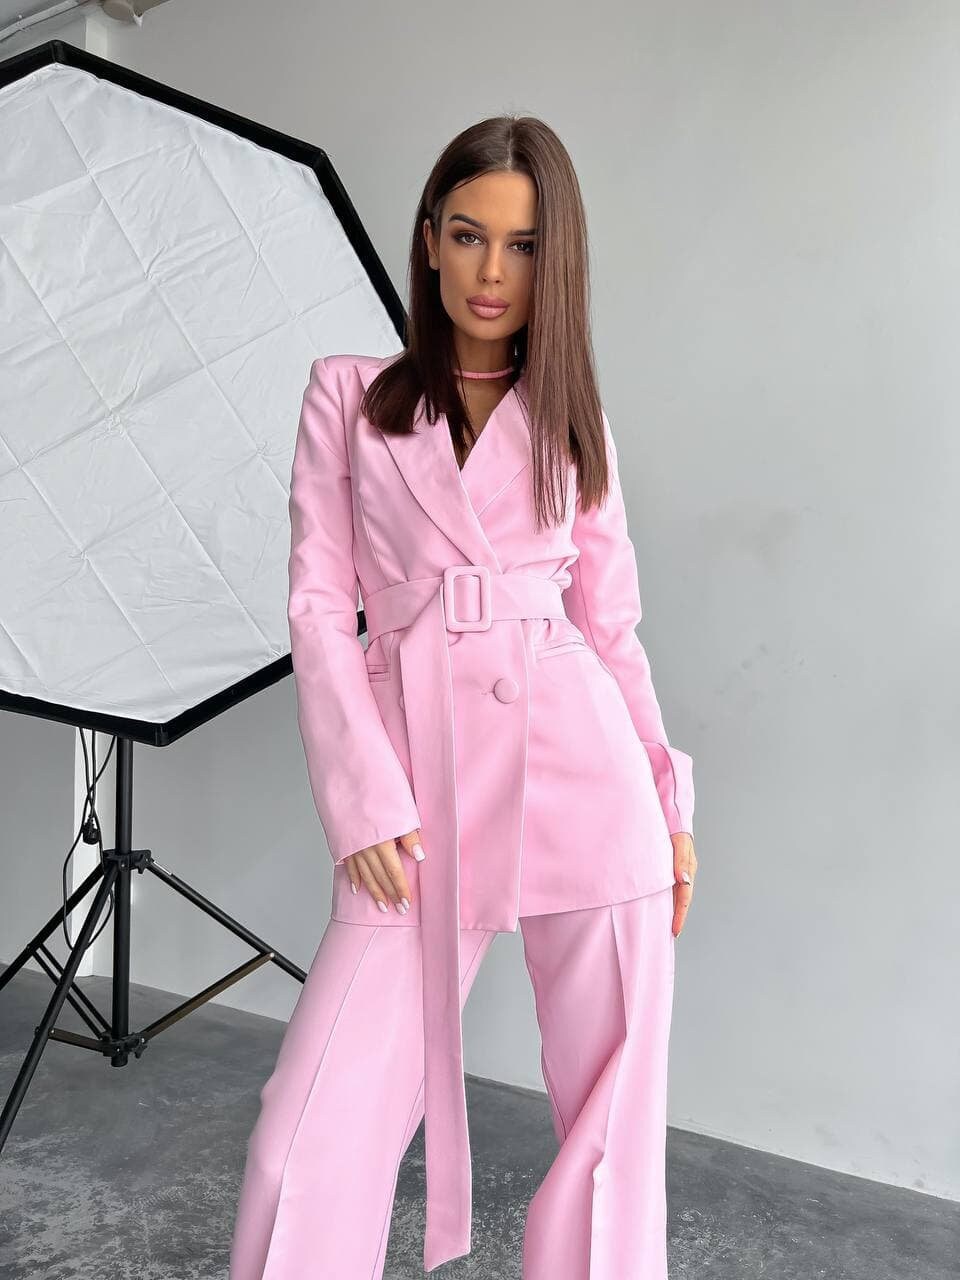 Light Pink Formal Pantsuit for Women, Business Casual Suit for